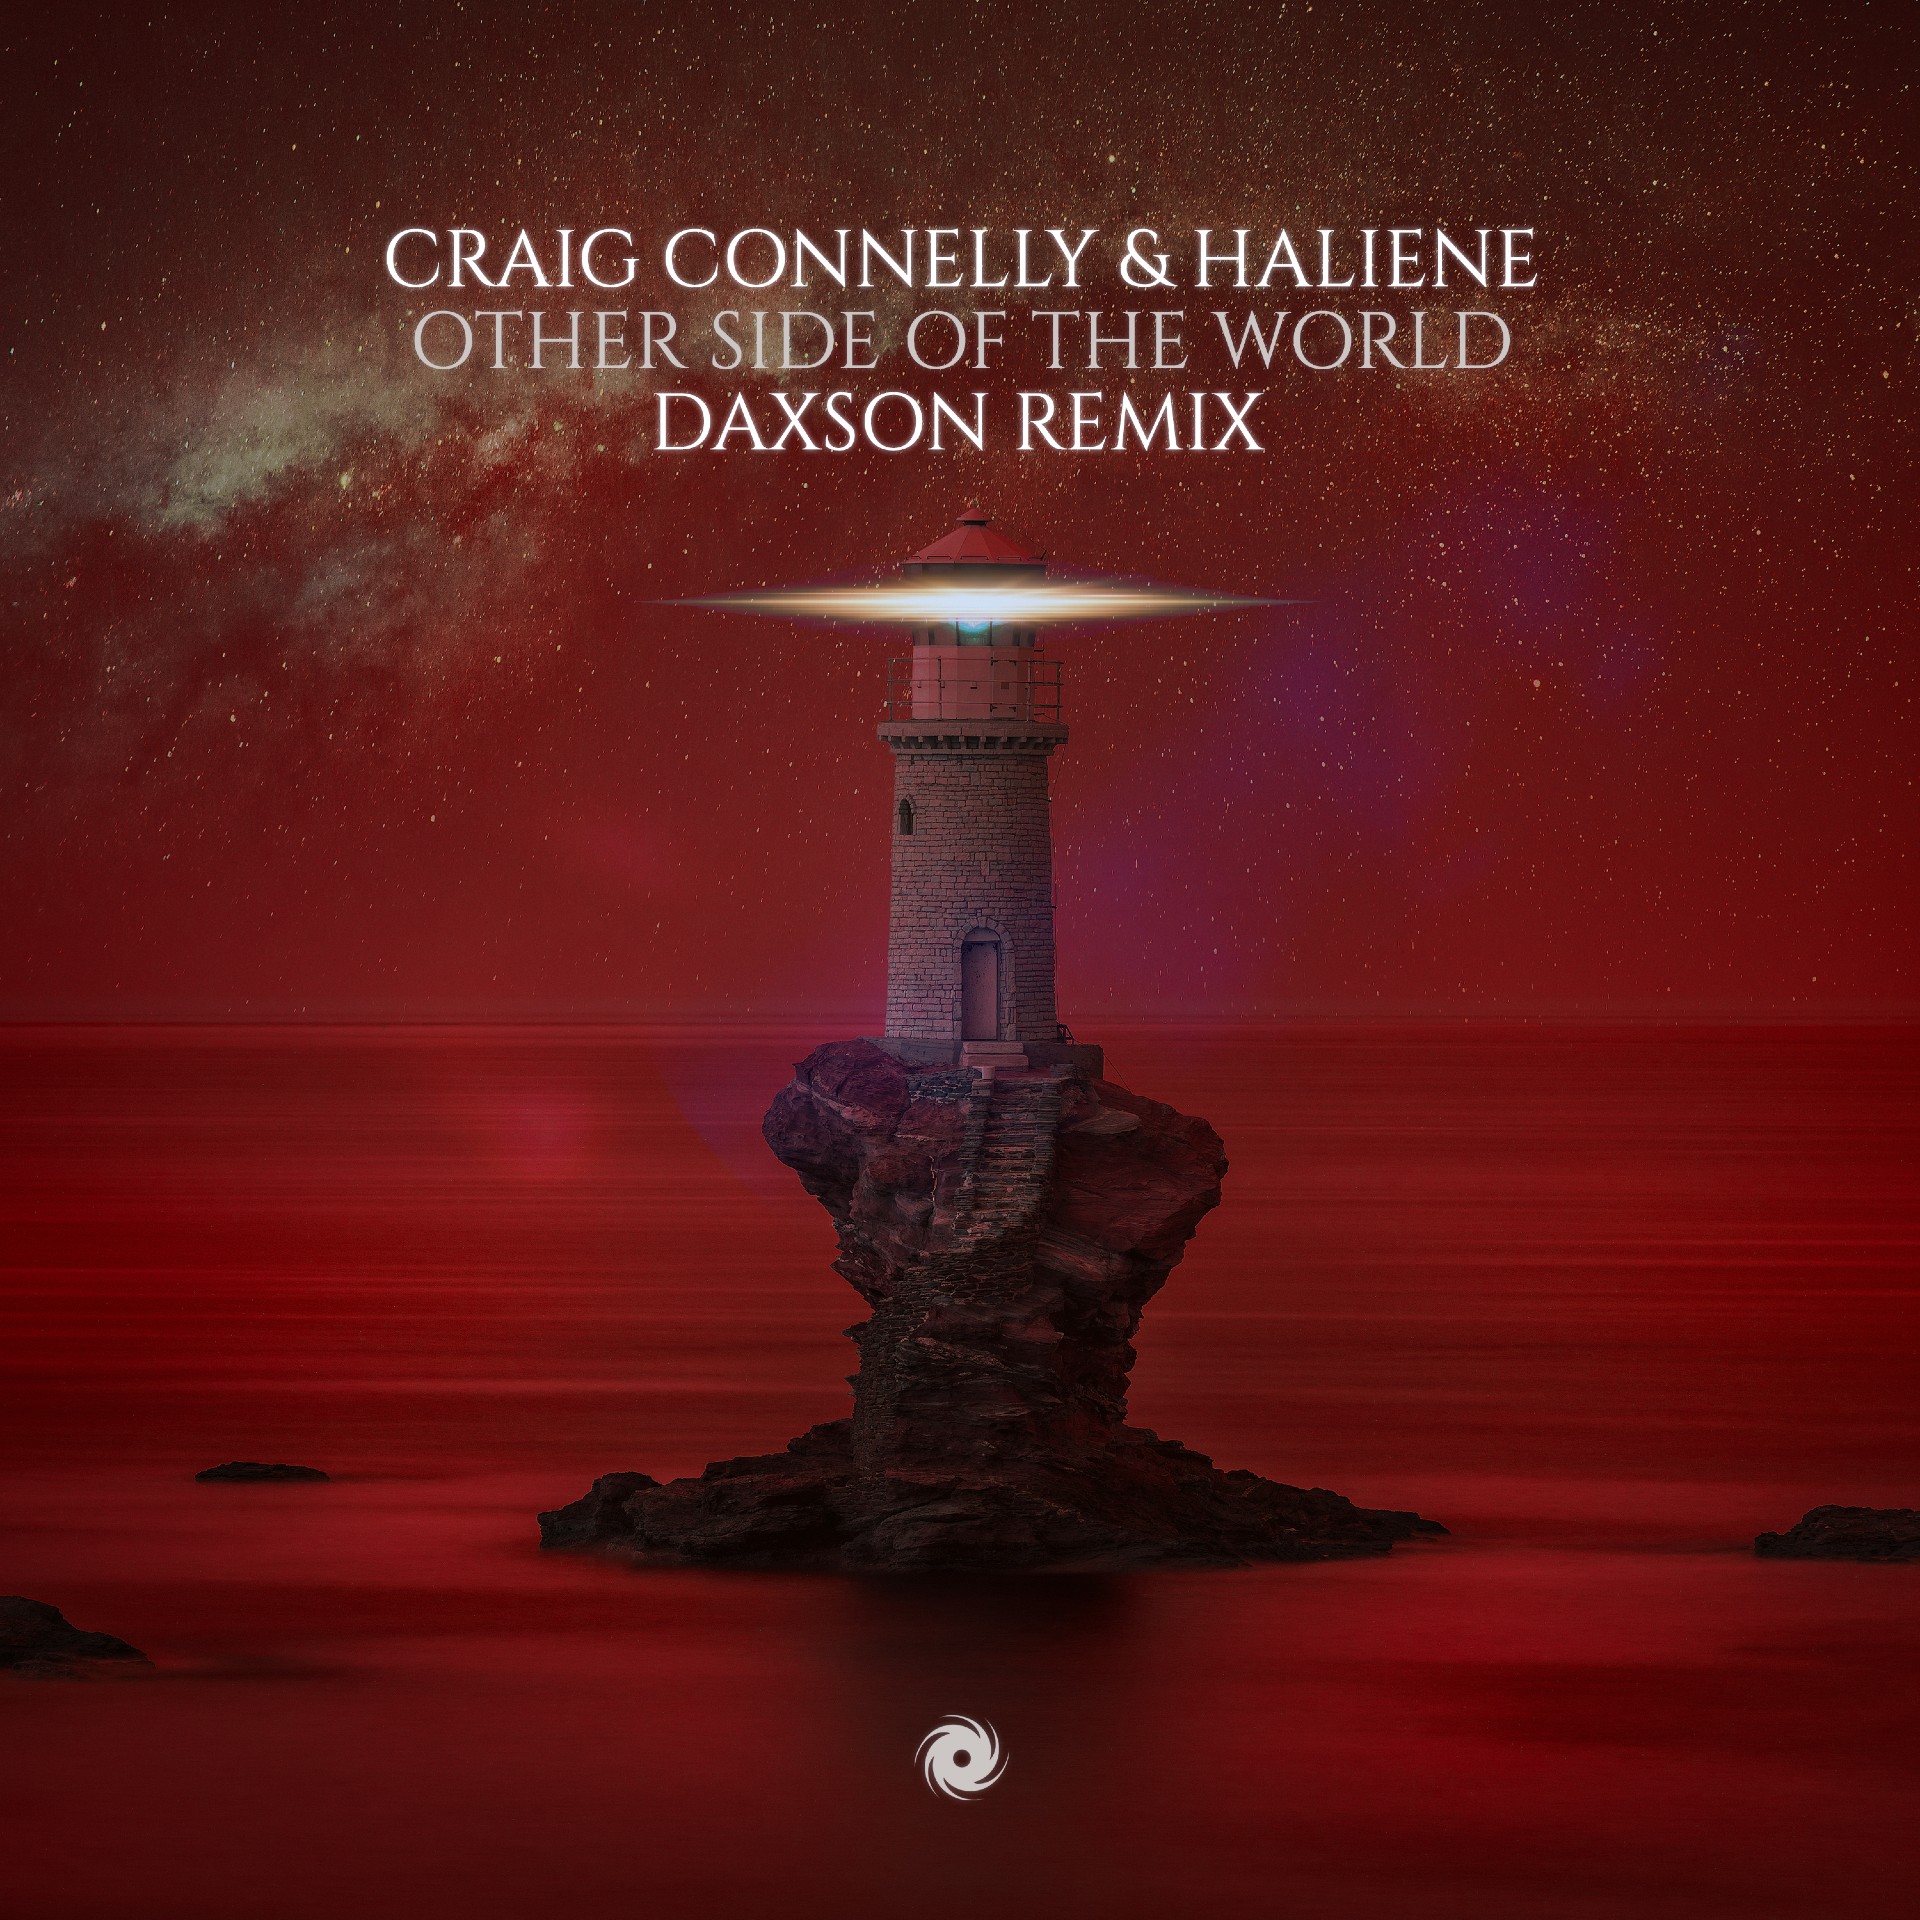 Craig Connelly and HALIENE presents Other Side Of The World (Daxson Remix) on Black Hole Recordings